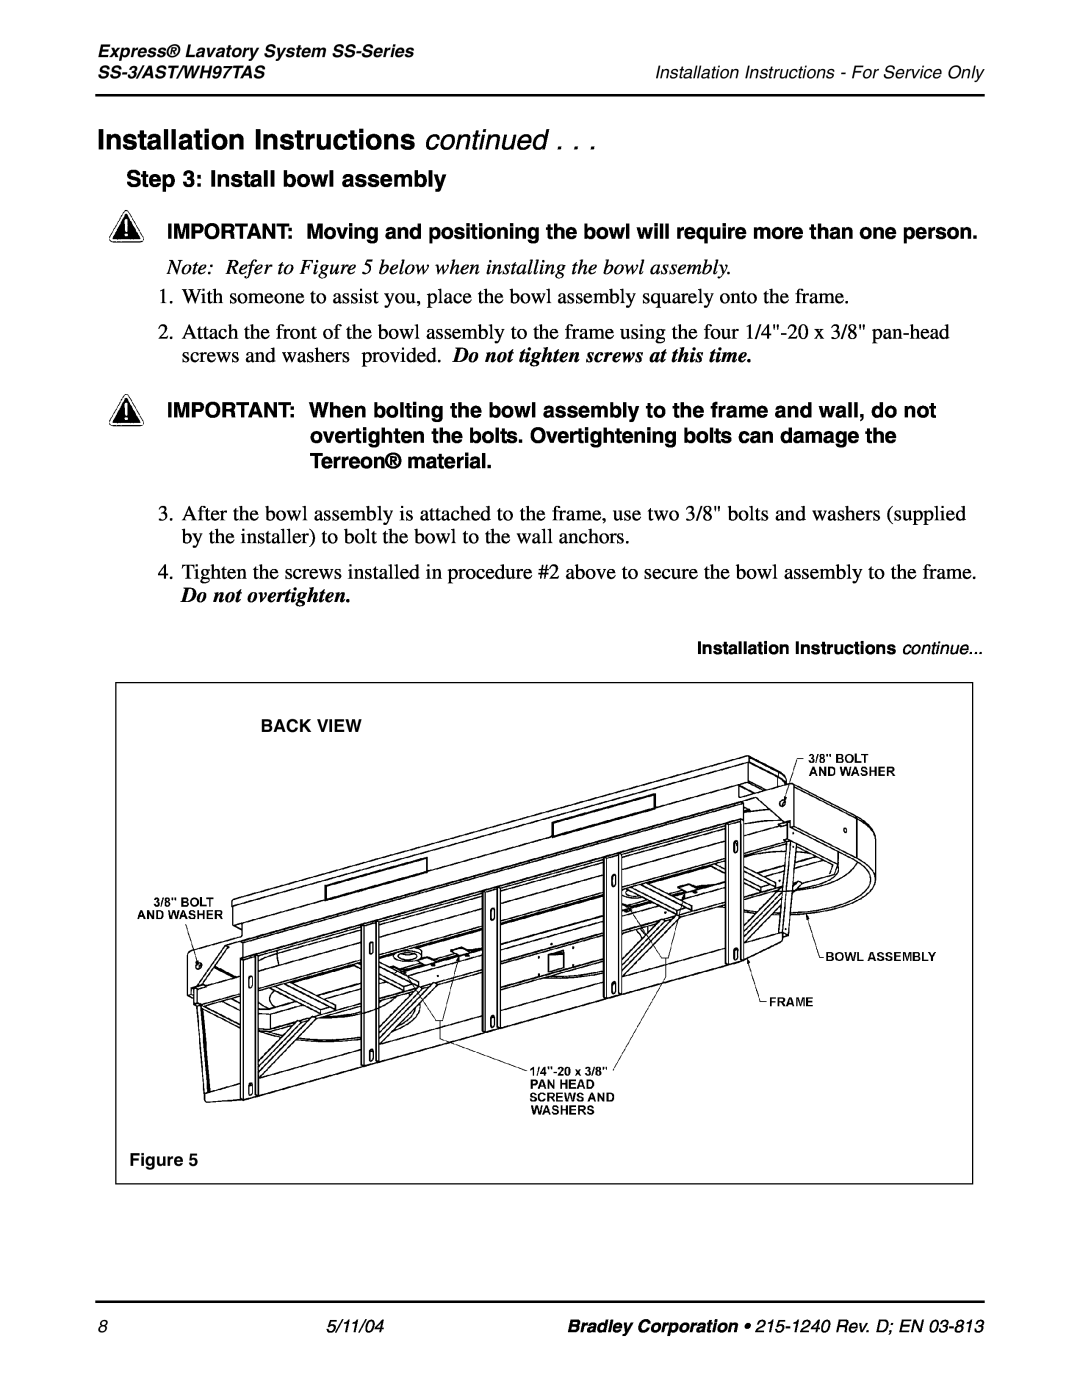 Bradley Smoker SS-3 Install bowl assembly, Note Refer to below when installing the bowl assembly, Do not overtighten 